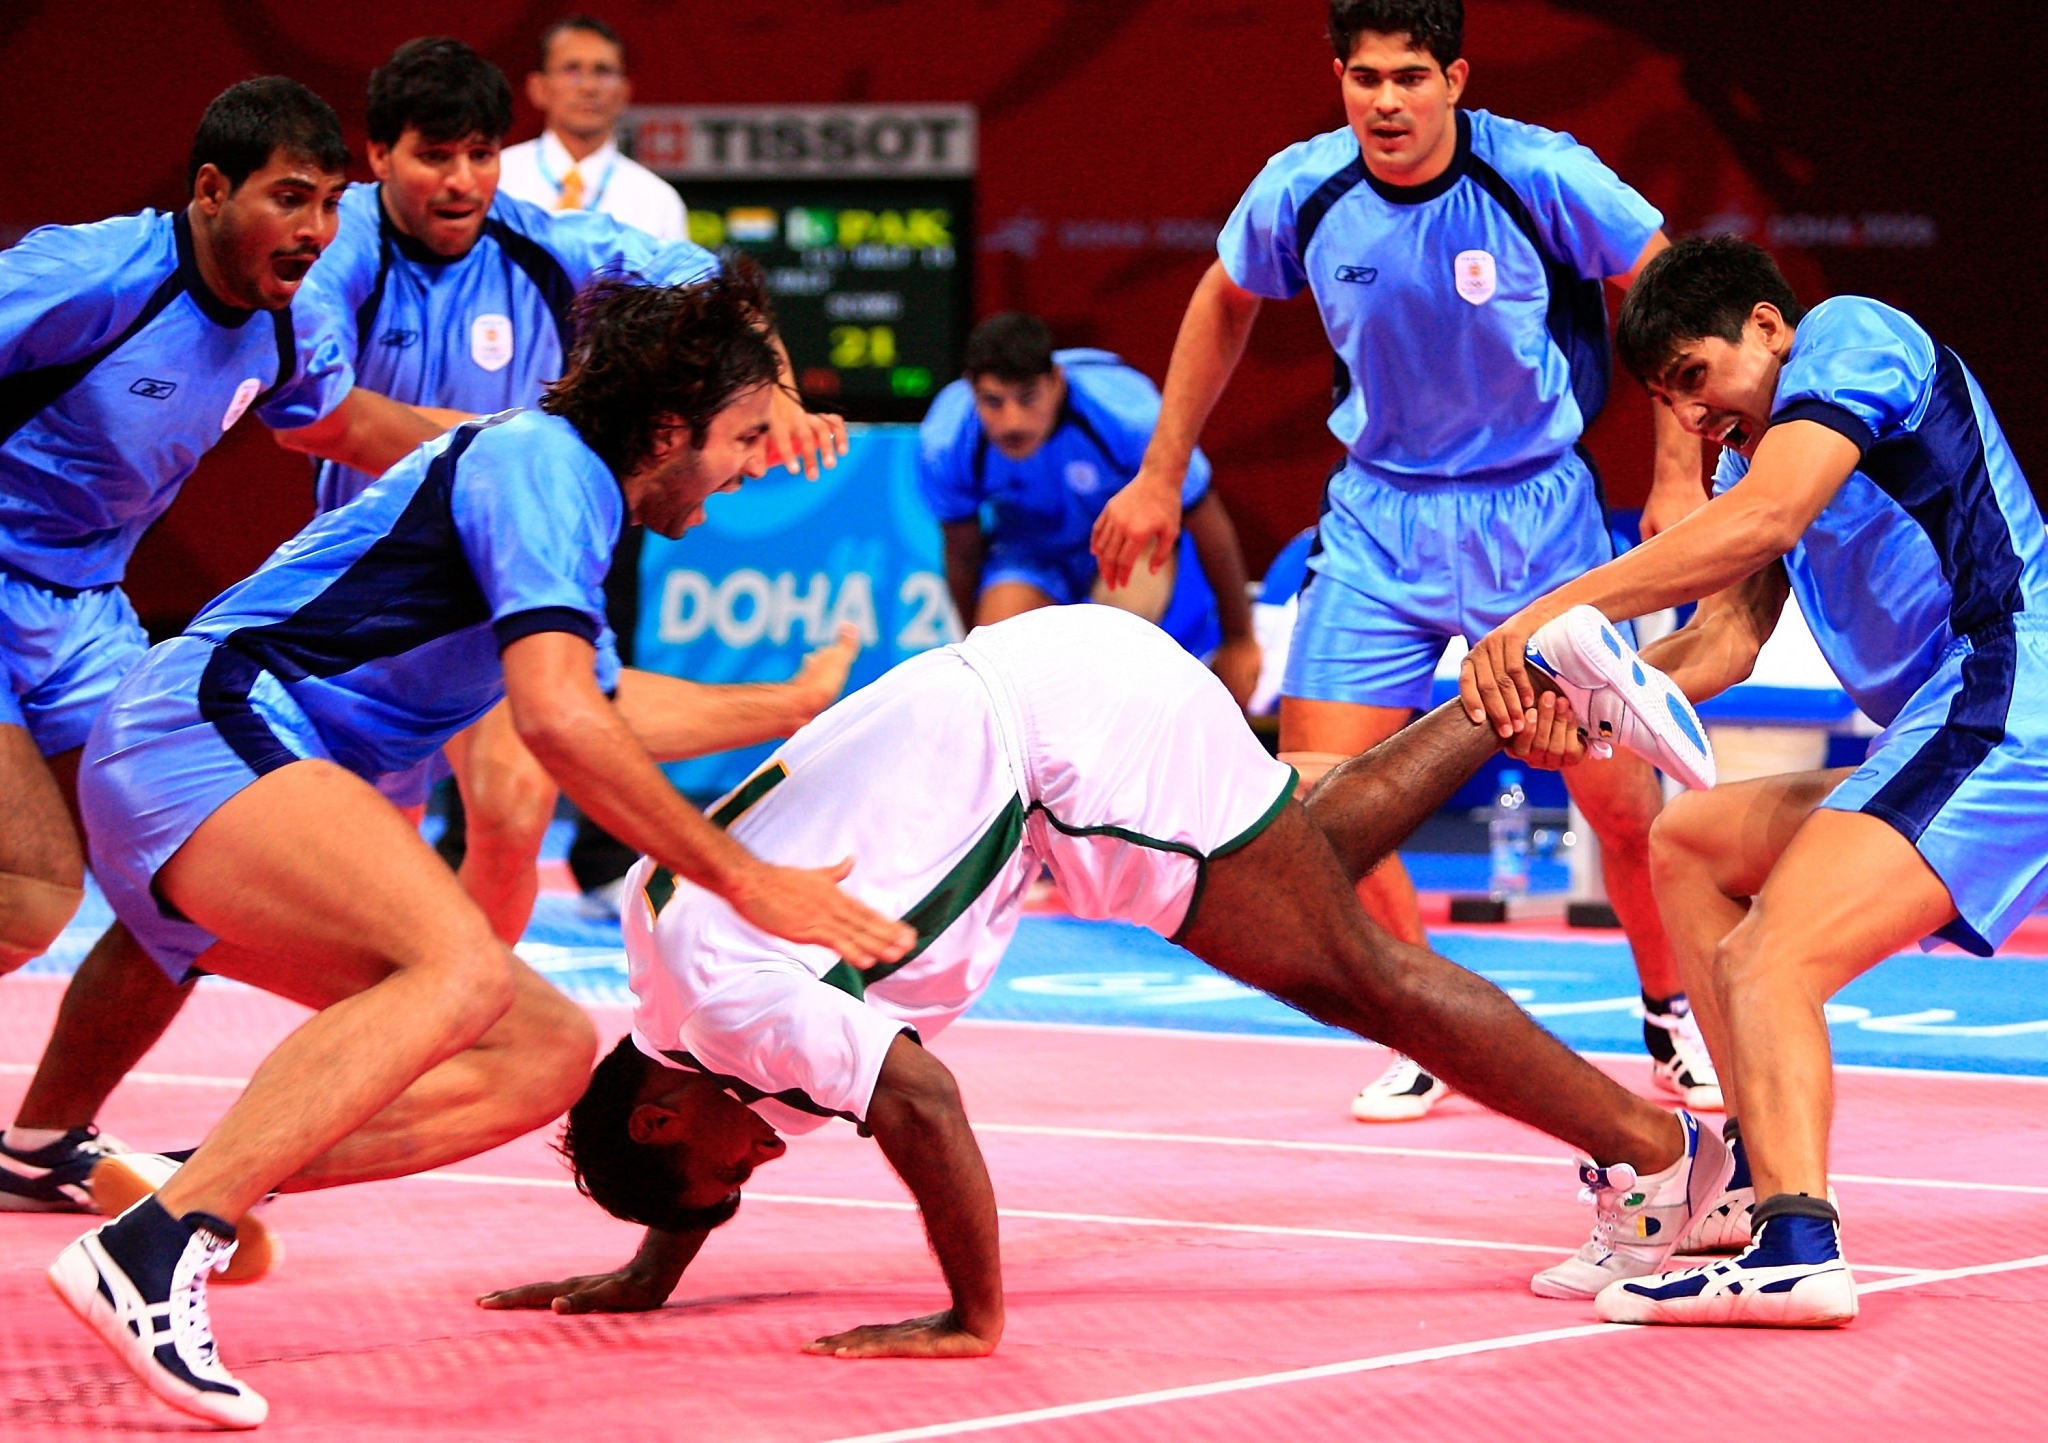 Indian Kabaddi team in action (Jamie Squire/Getty Images)